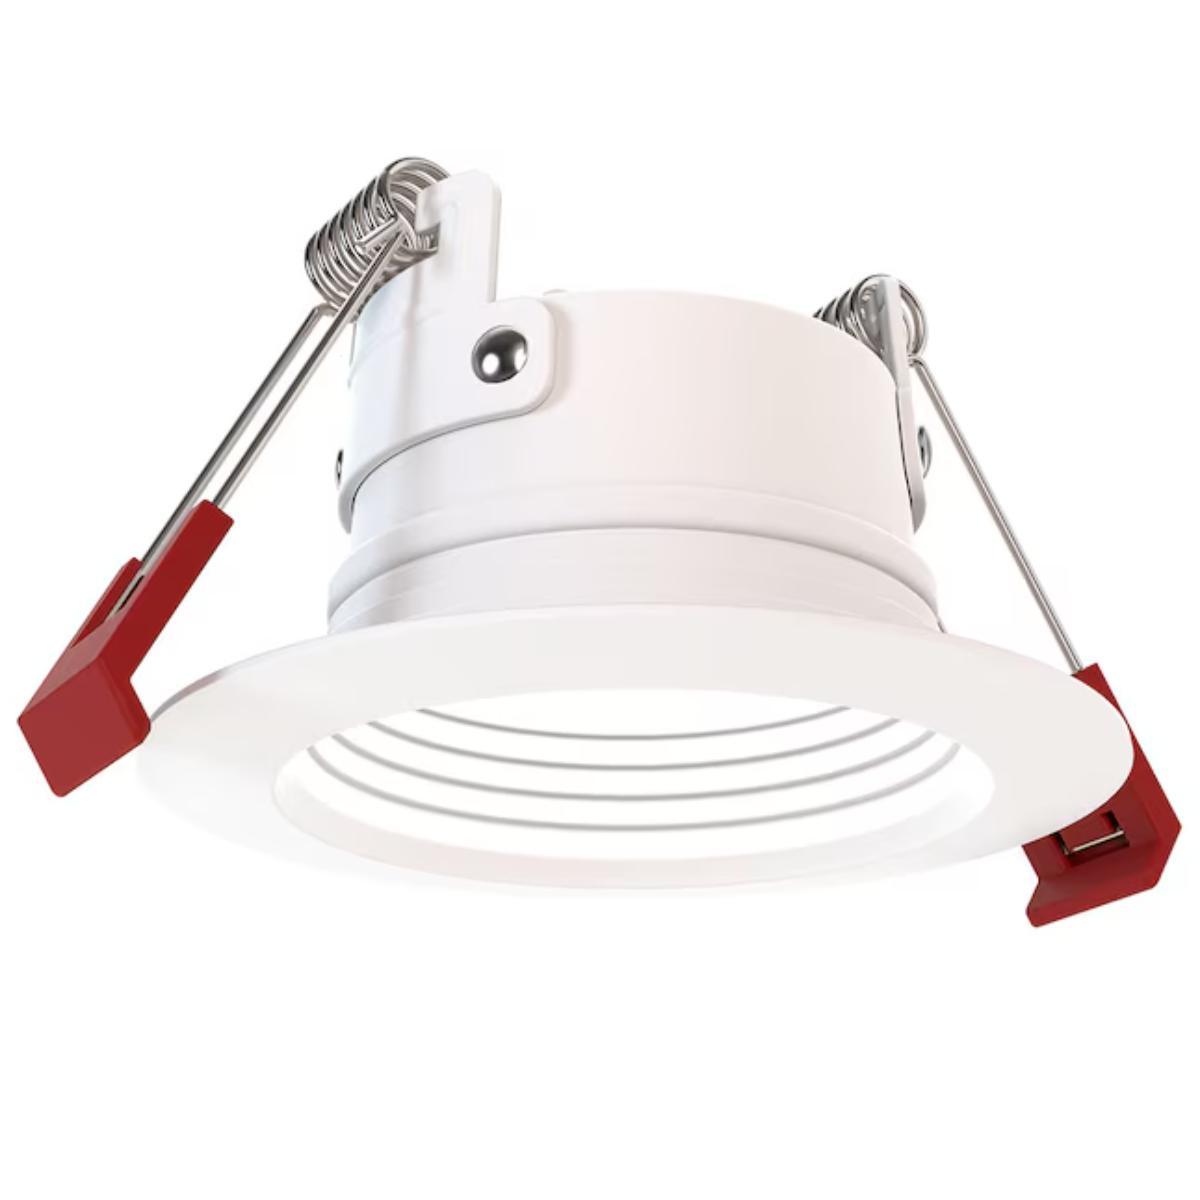 2 inch Wafer Canless LED Recessed Light, 10 Watt, Adjustable 544/725/907 Lumens, Selectable CCT, 2700K to 5000K, Baffle Trim